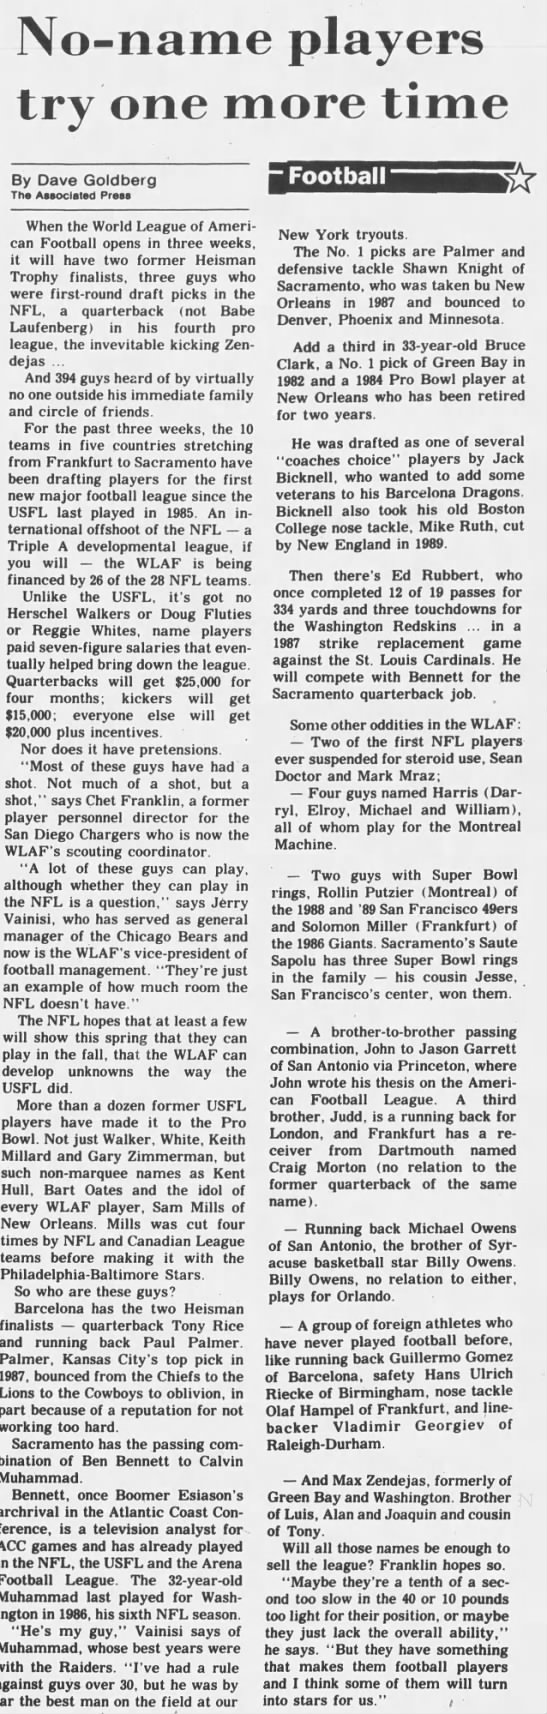 An article about some NFL connections to the 1991 WLAF season. - 